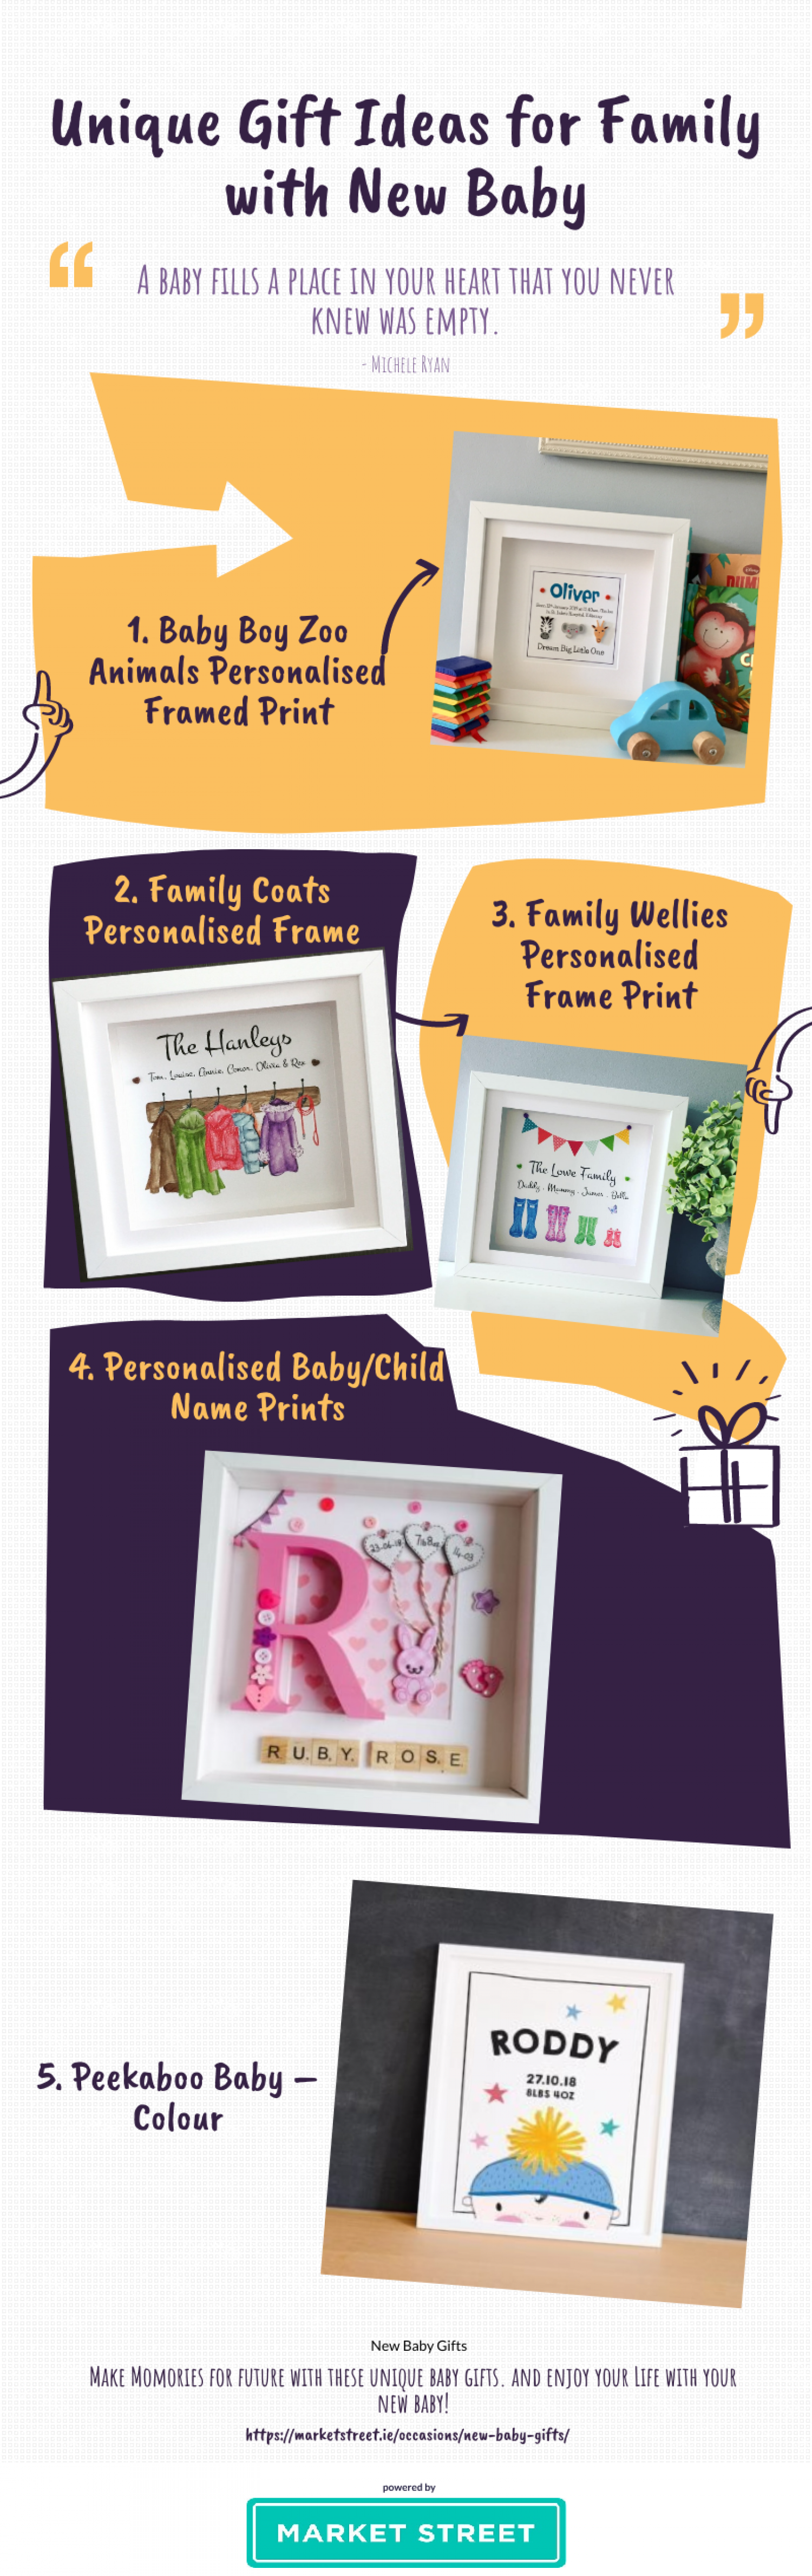 Unique Gift Ideas for Family with New Baby Infographic